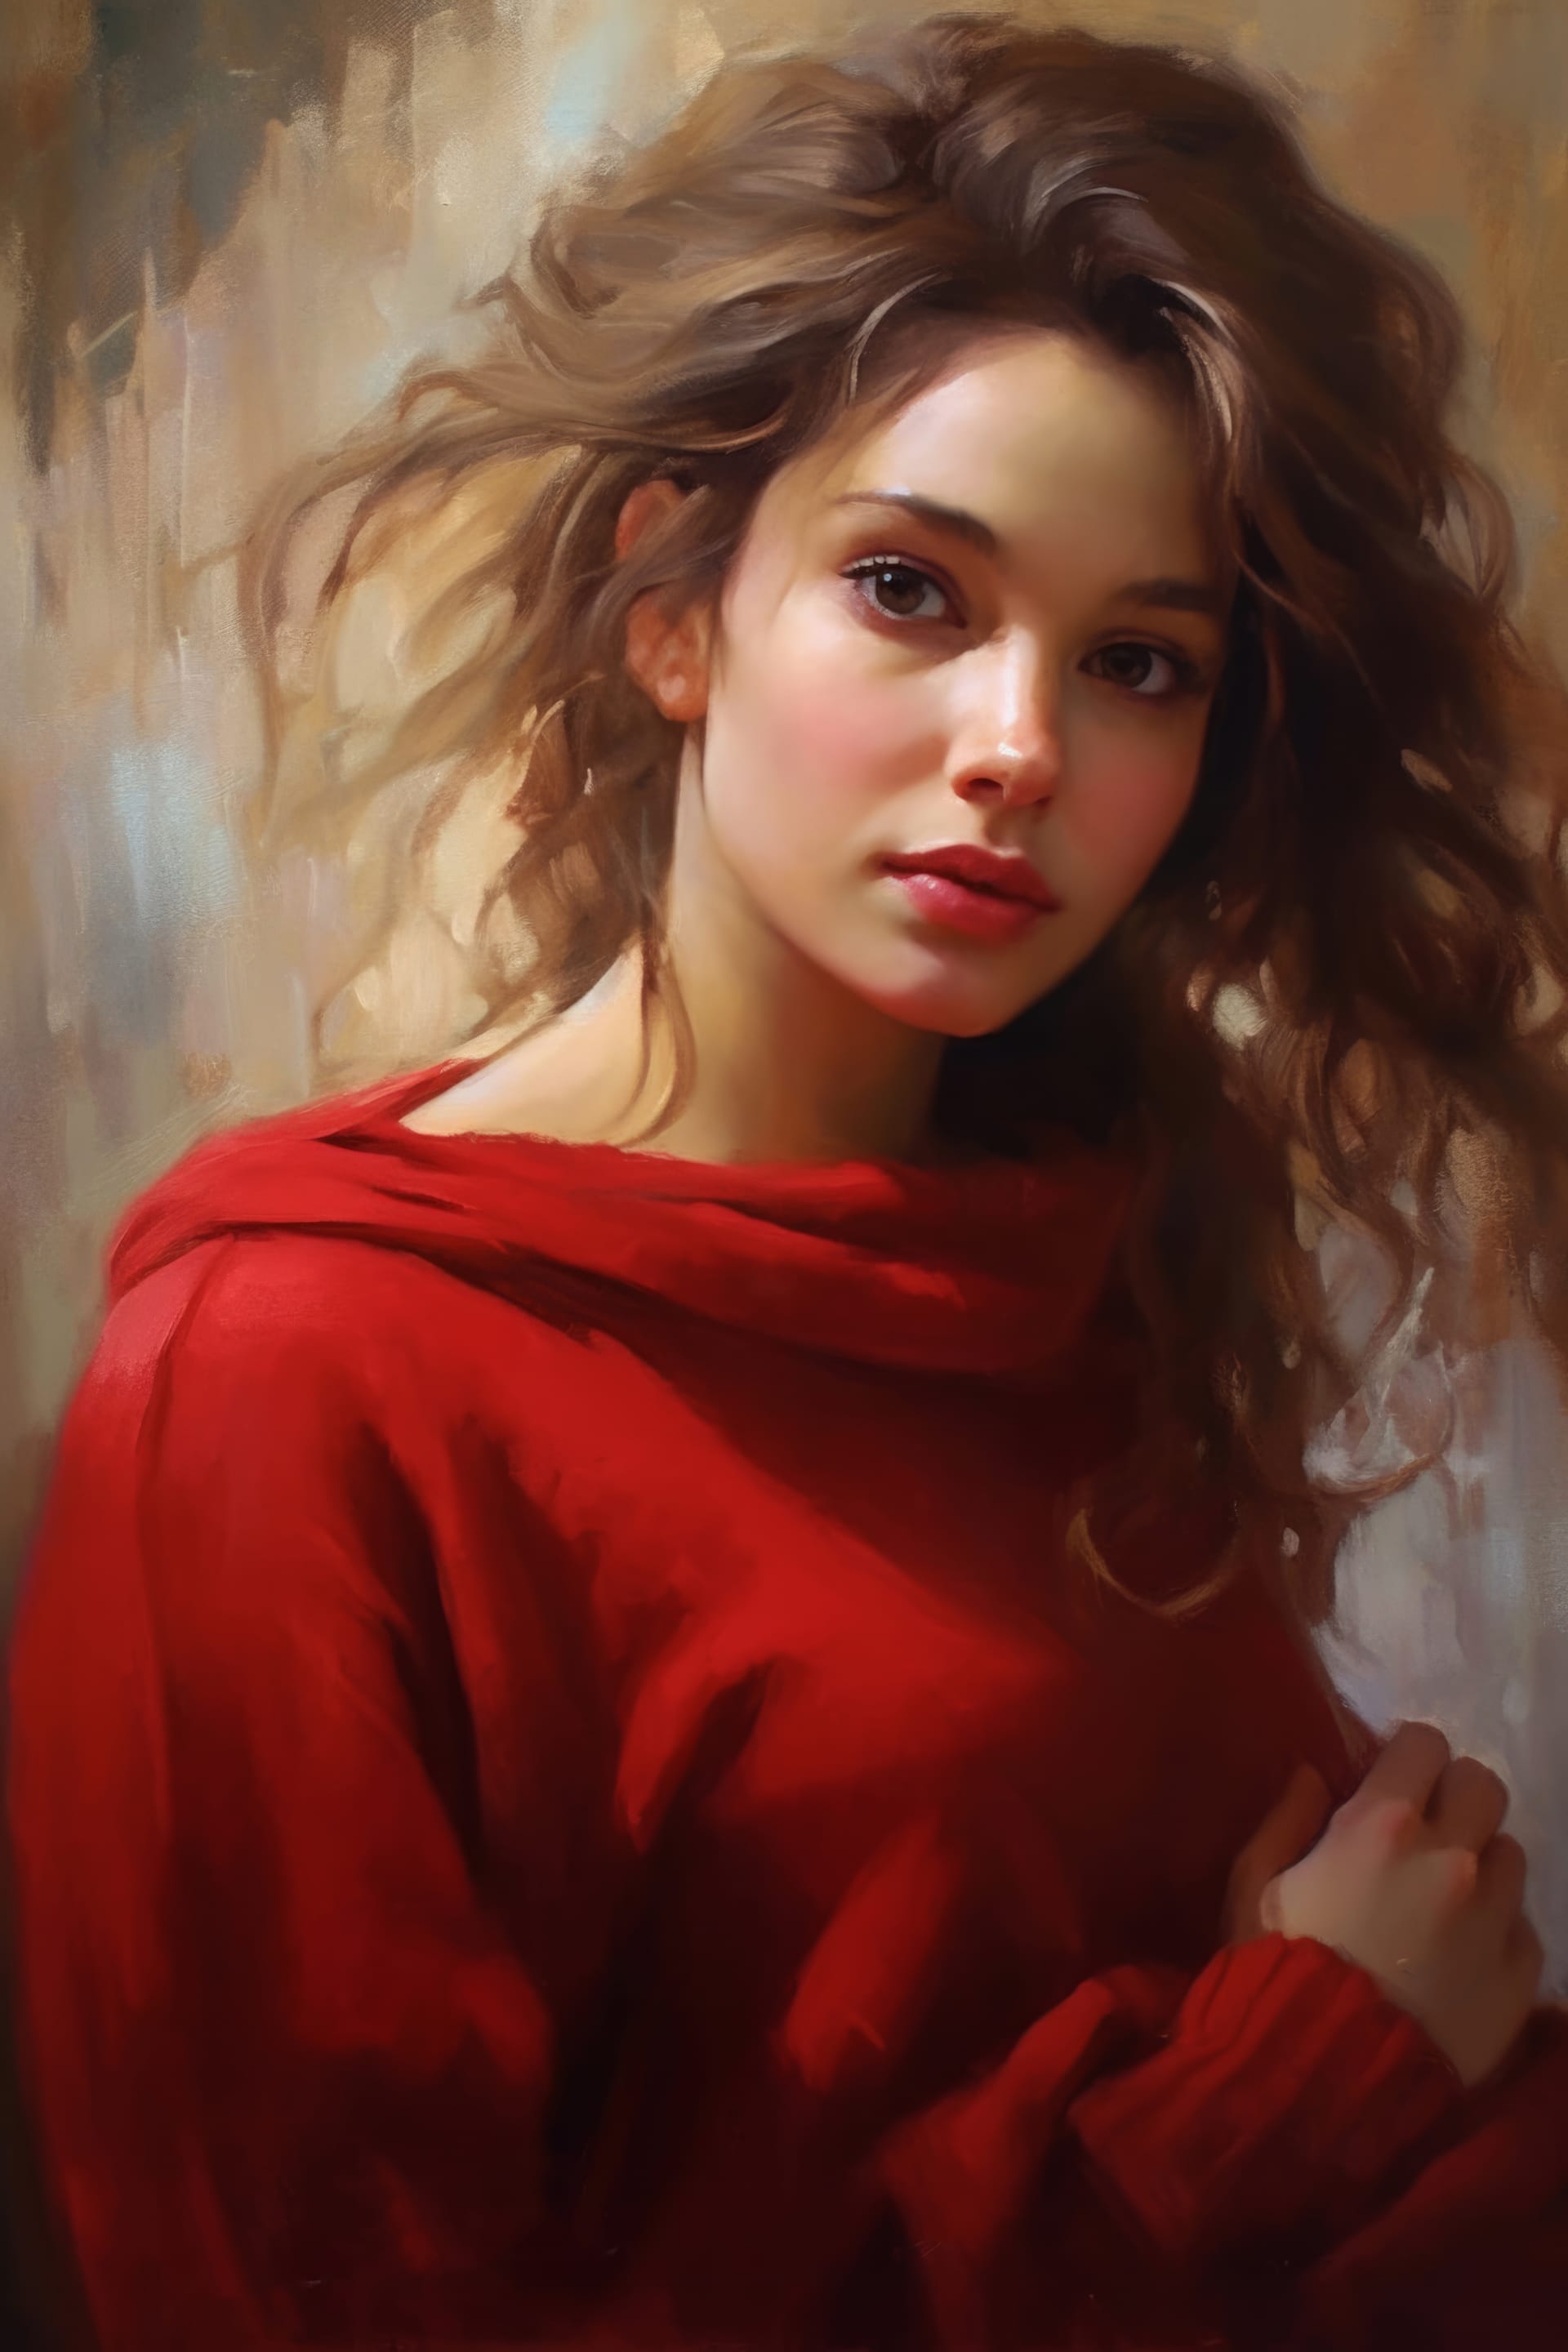 Painting beautiful woman with red sweater